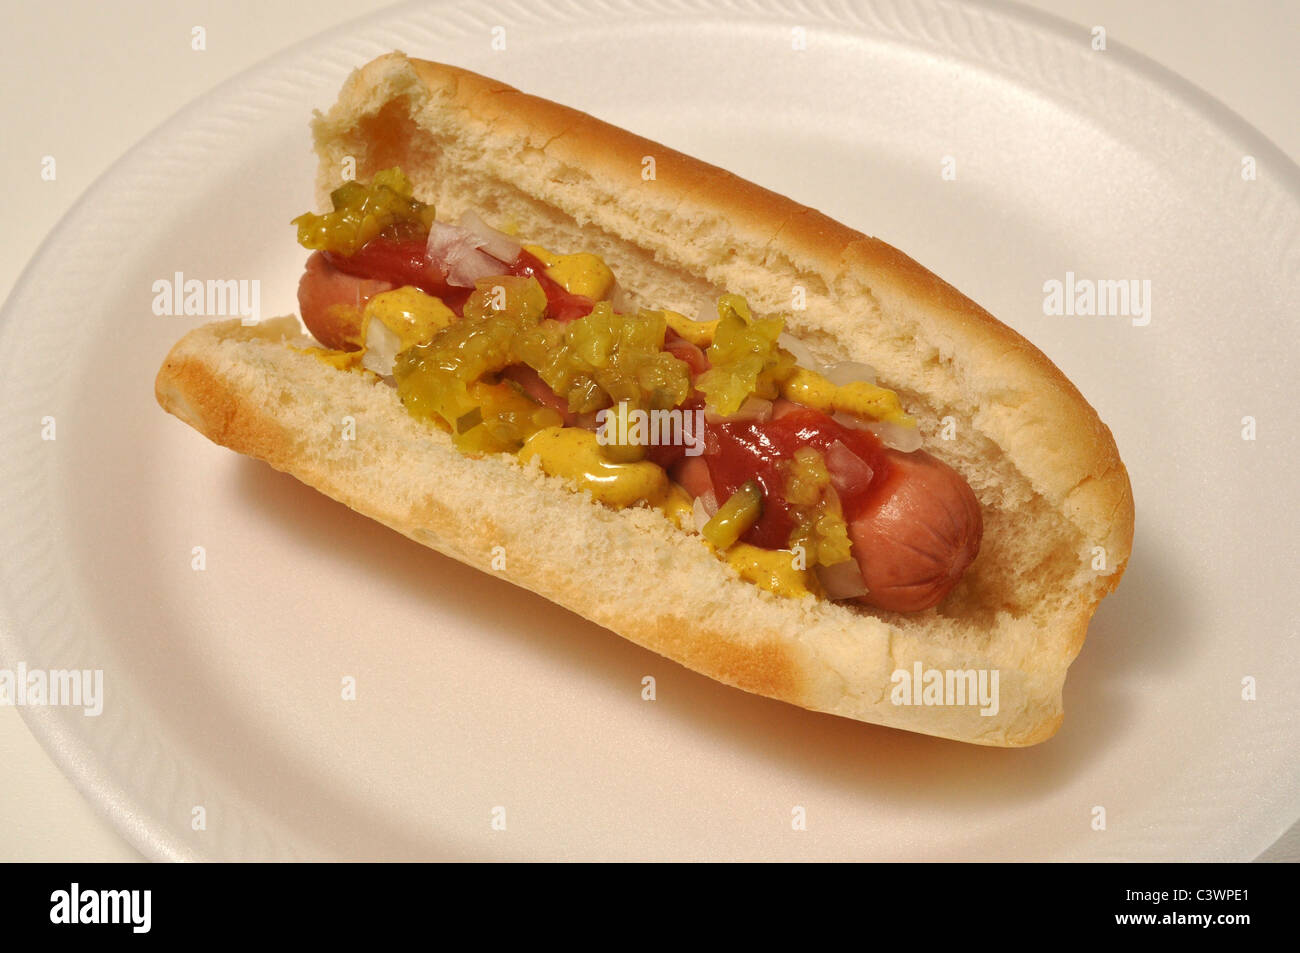 A hot dog with all the works is on a white plate. Stock Photo